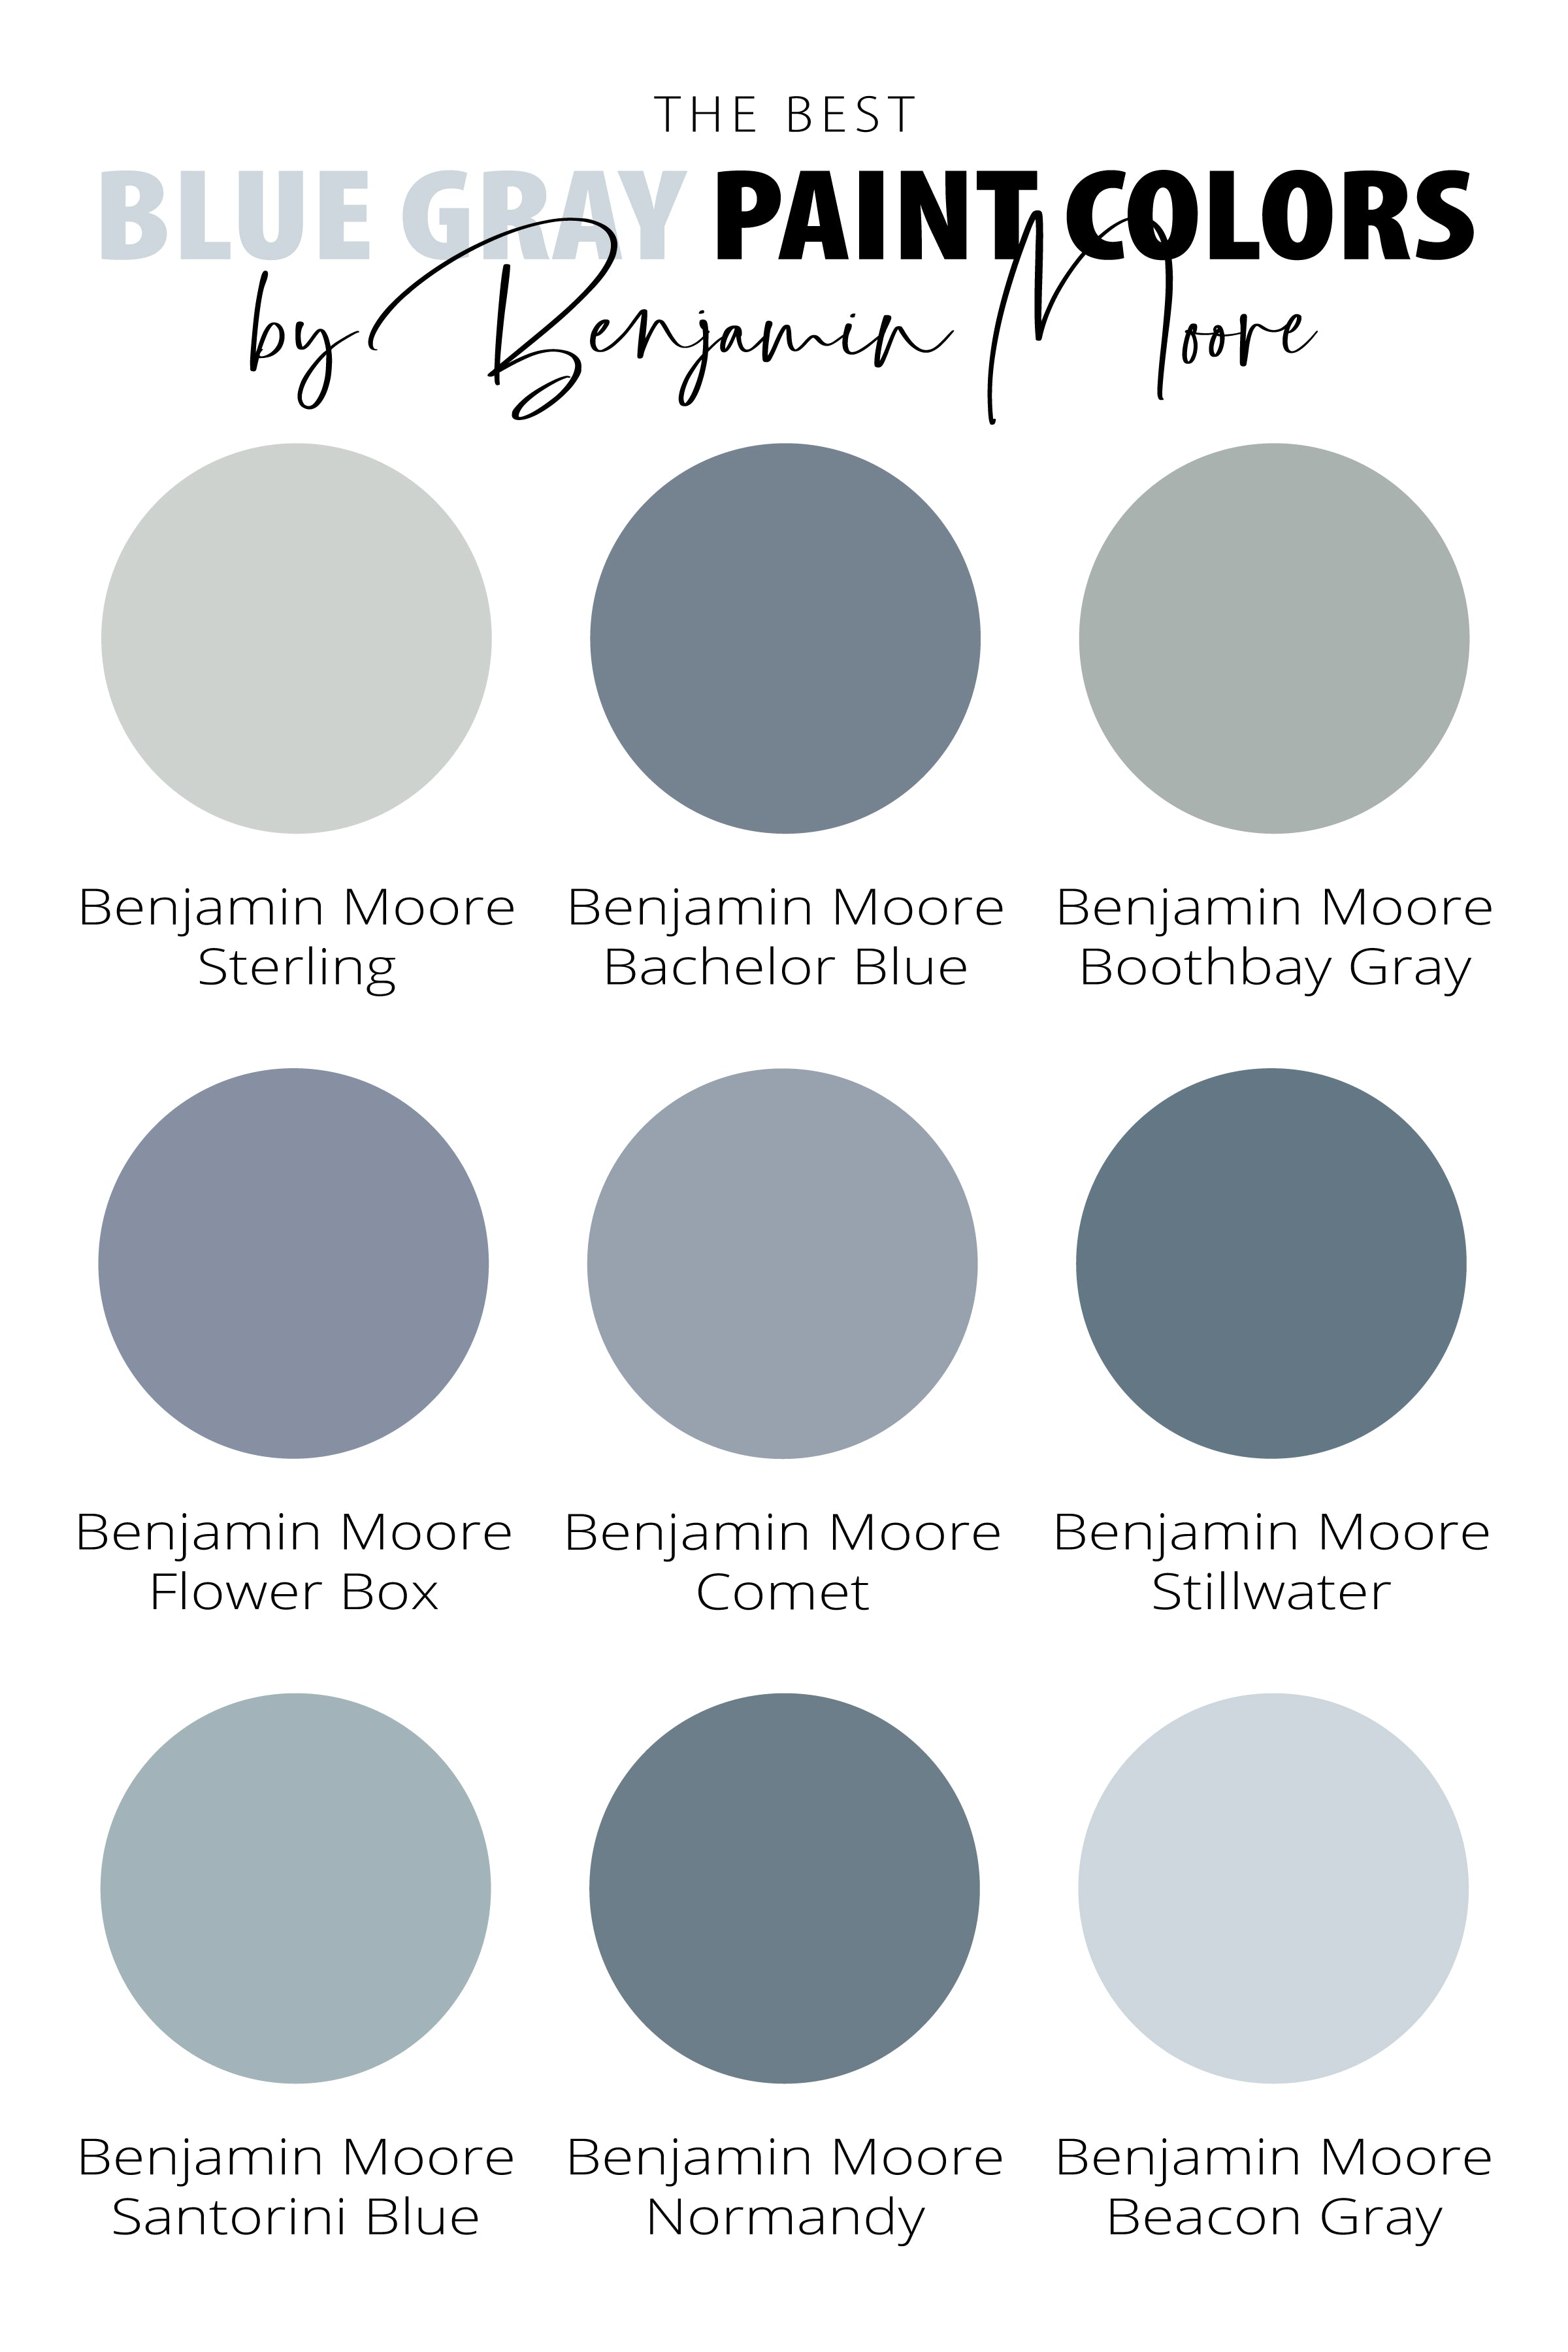 The 75+ Best Blue Gray Paint Colors for Home in 2023 (For Interior & E ...